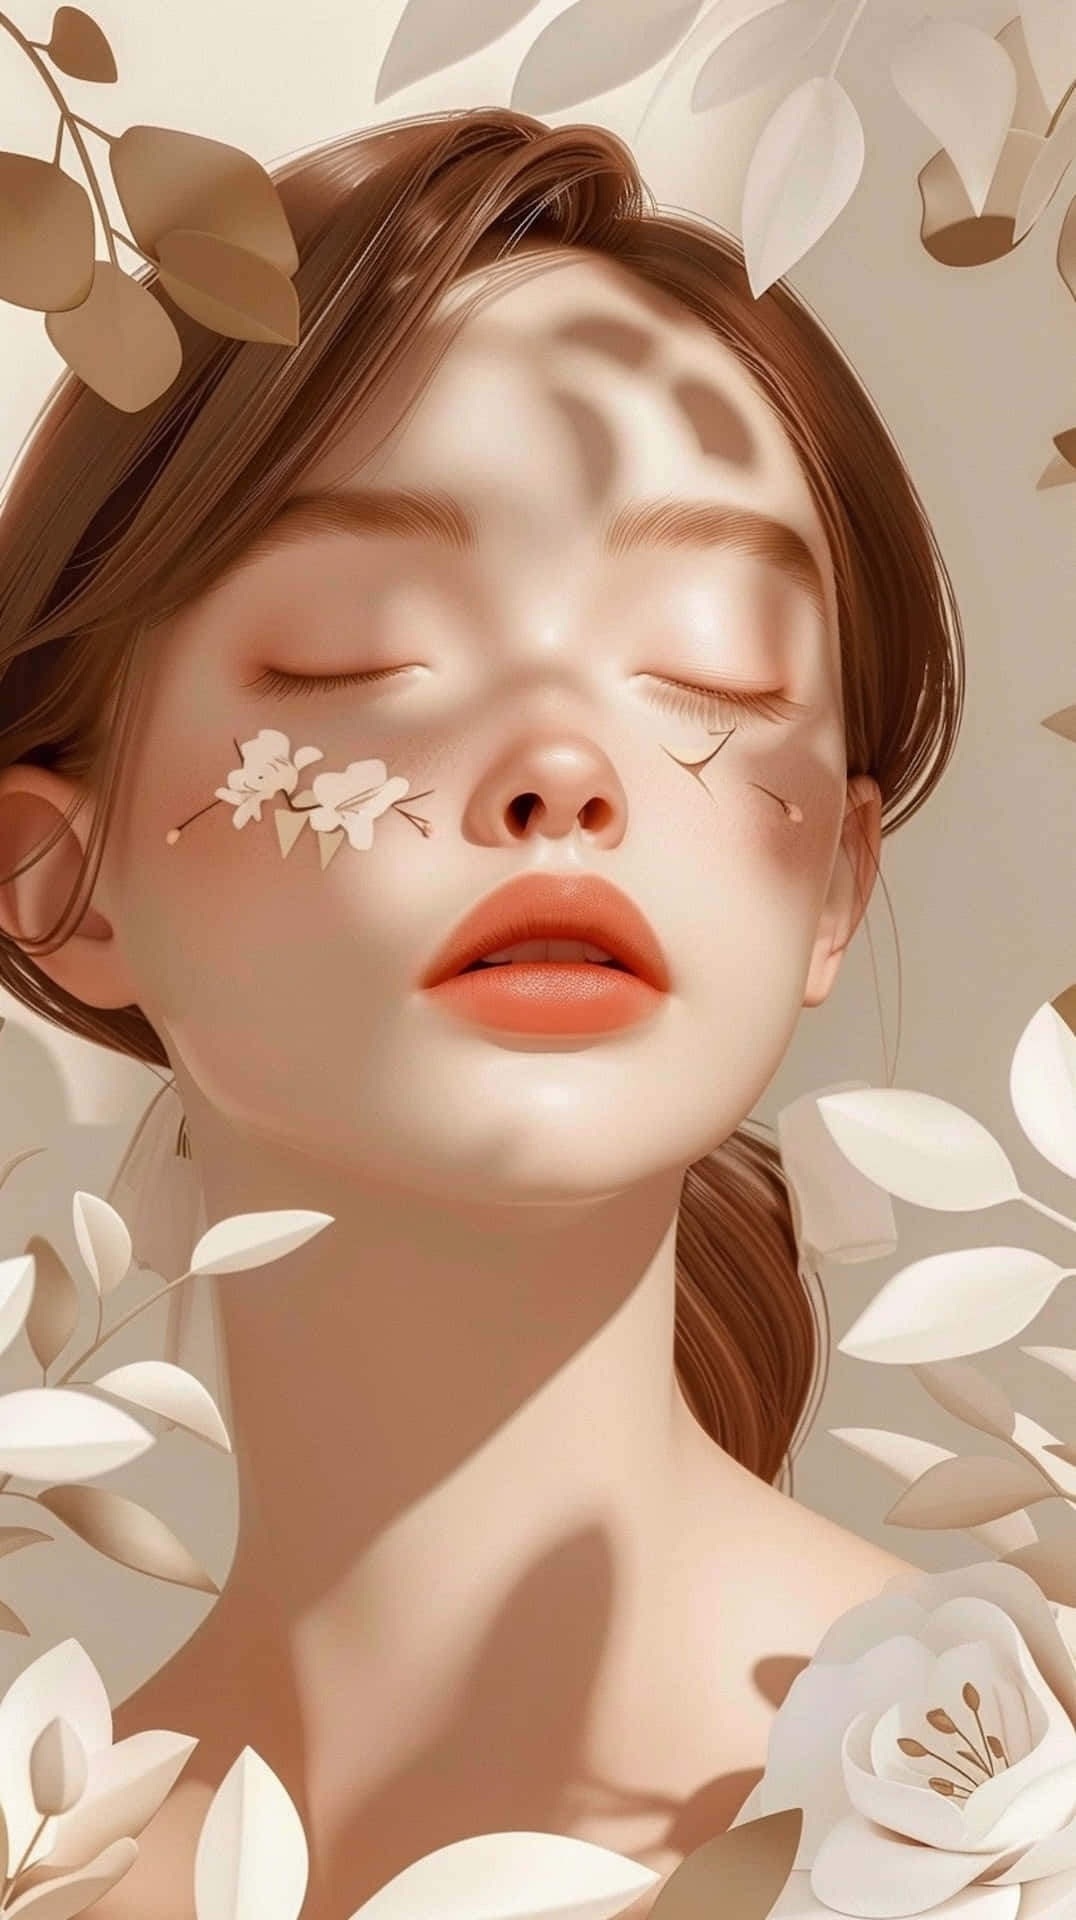 Clean Girl Aesthetic Floral Shadow Portrait Wallpaper